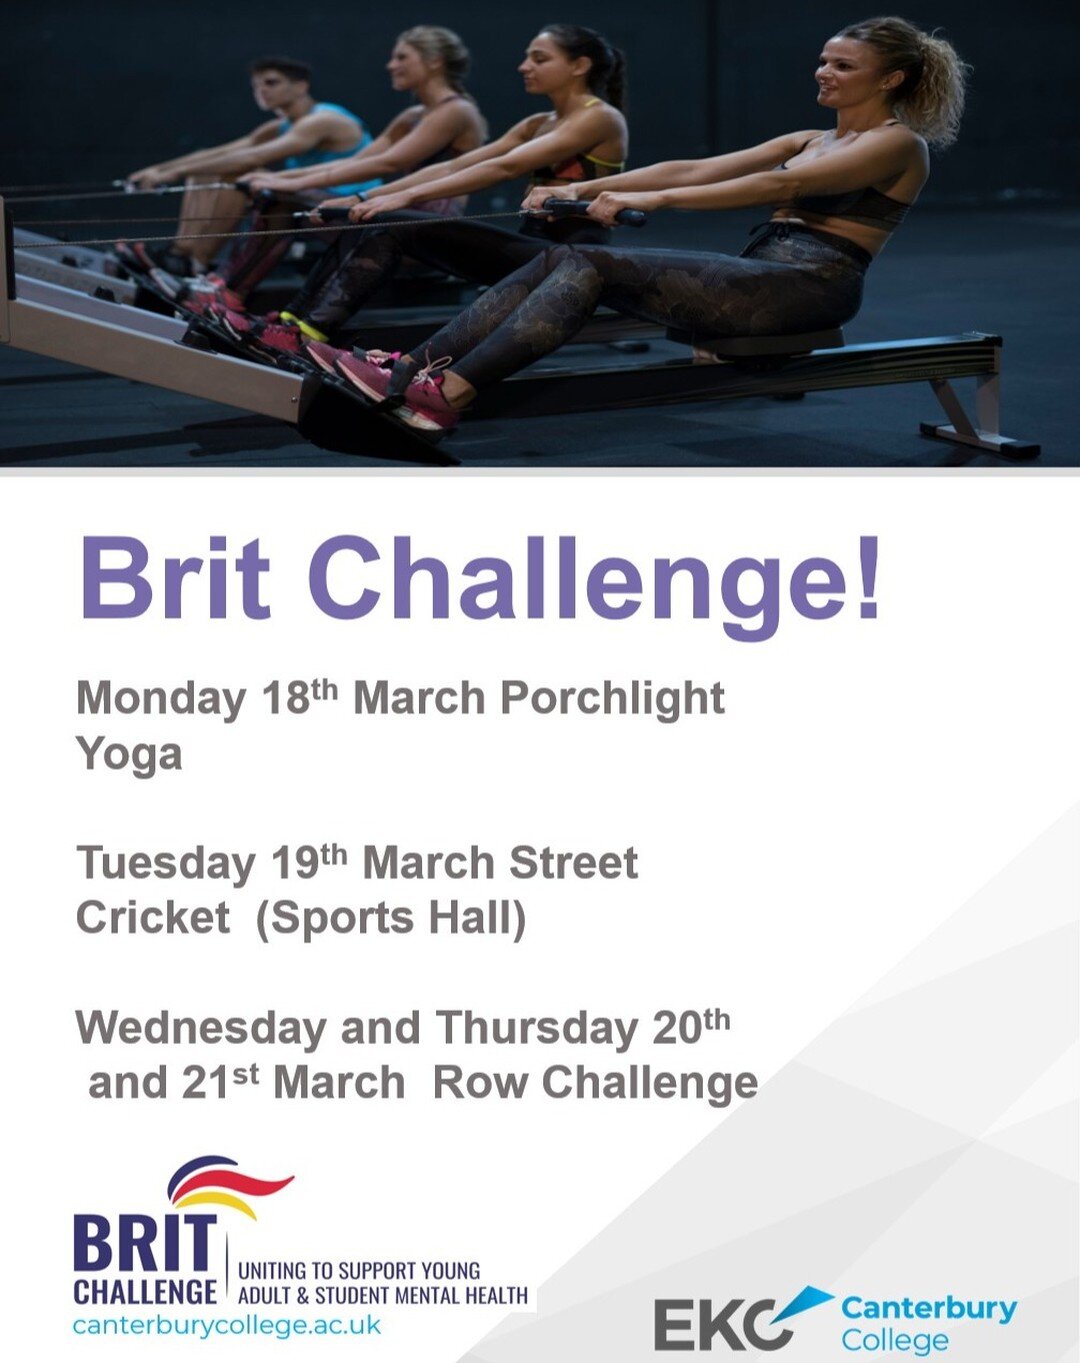 Brit Challenge 2024 - Happening in Canterbury College next week....

Day 1 Monday: Porchlight will host a mental health and wellness stall, accompanied by a rejuvenating yoga class starting at 11:45 AM in SU end of the Student Space.

Day 2 Tuesday J